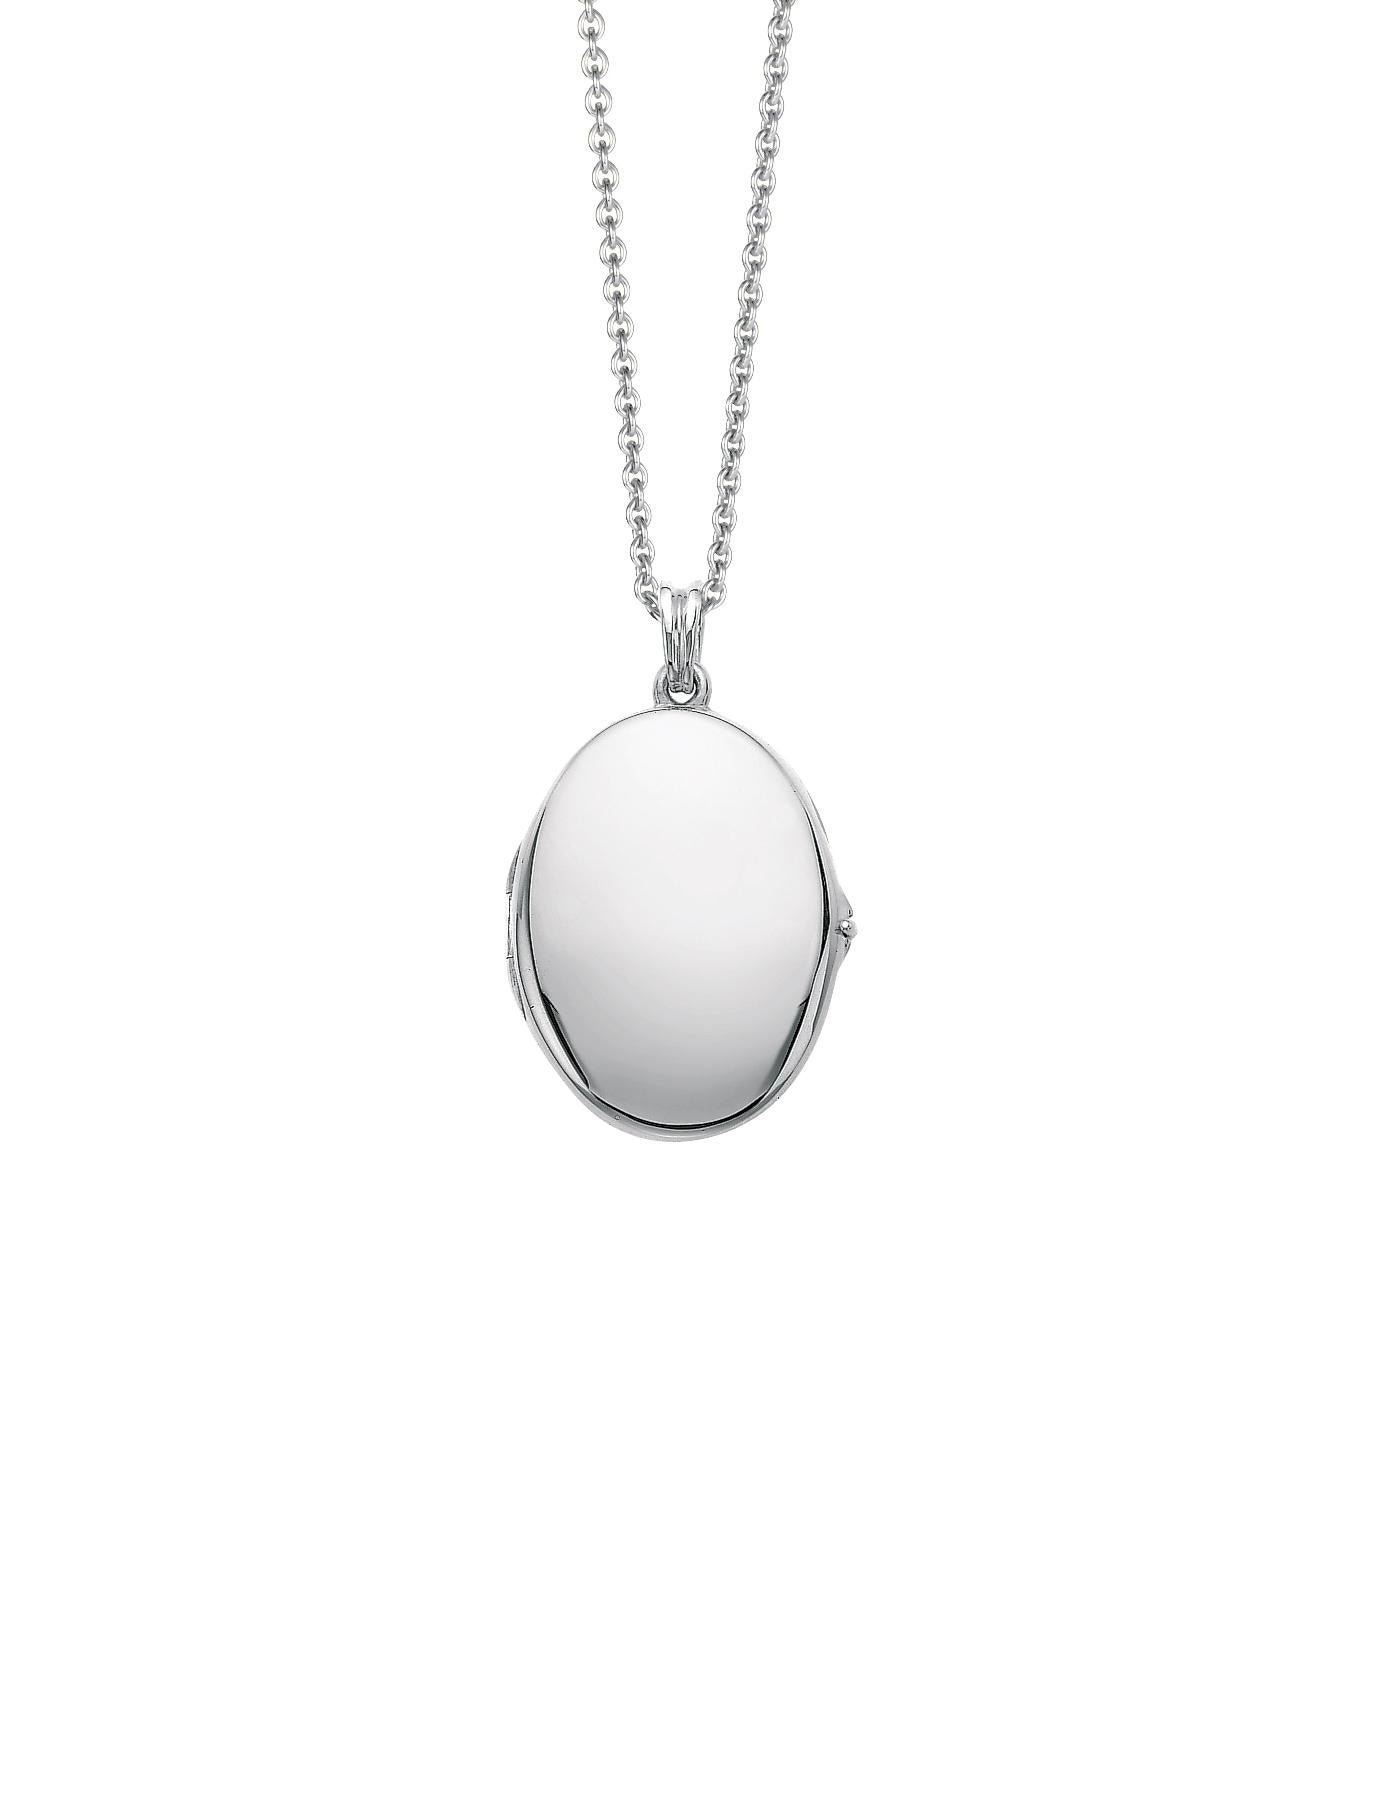 Victor Mayer customizable oval pendant locket 18k white gold, Hallmark Collection, measurements app. 23.0 mm x 32.0 mm

About the creator Victor Mayer
Victor Mayer is internationally renowned for elegant timeless designs and unrivalled expertise in